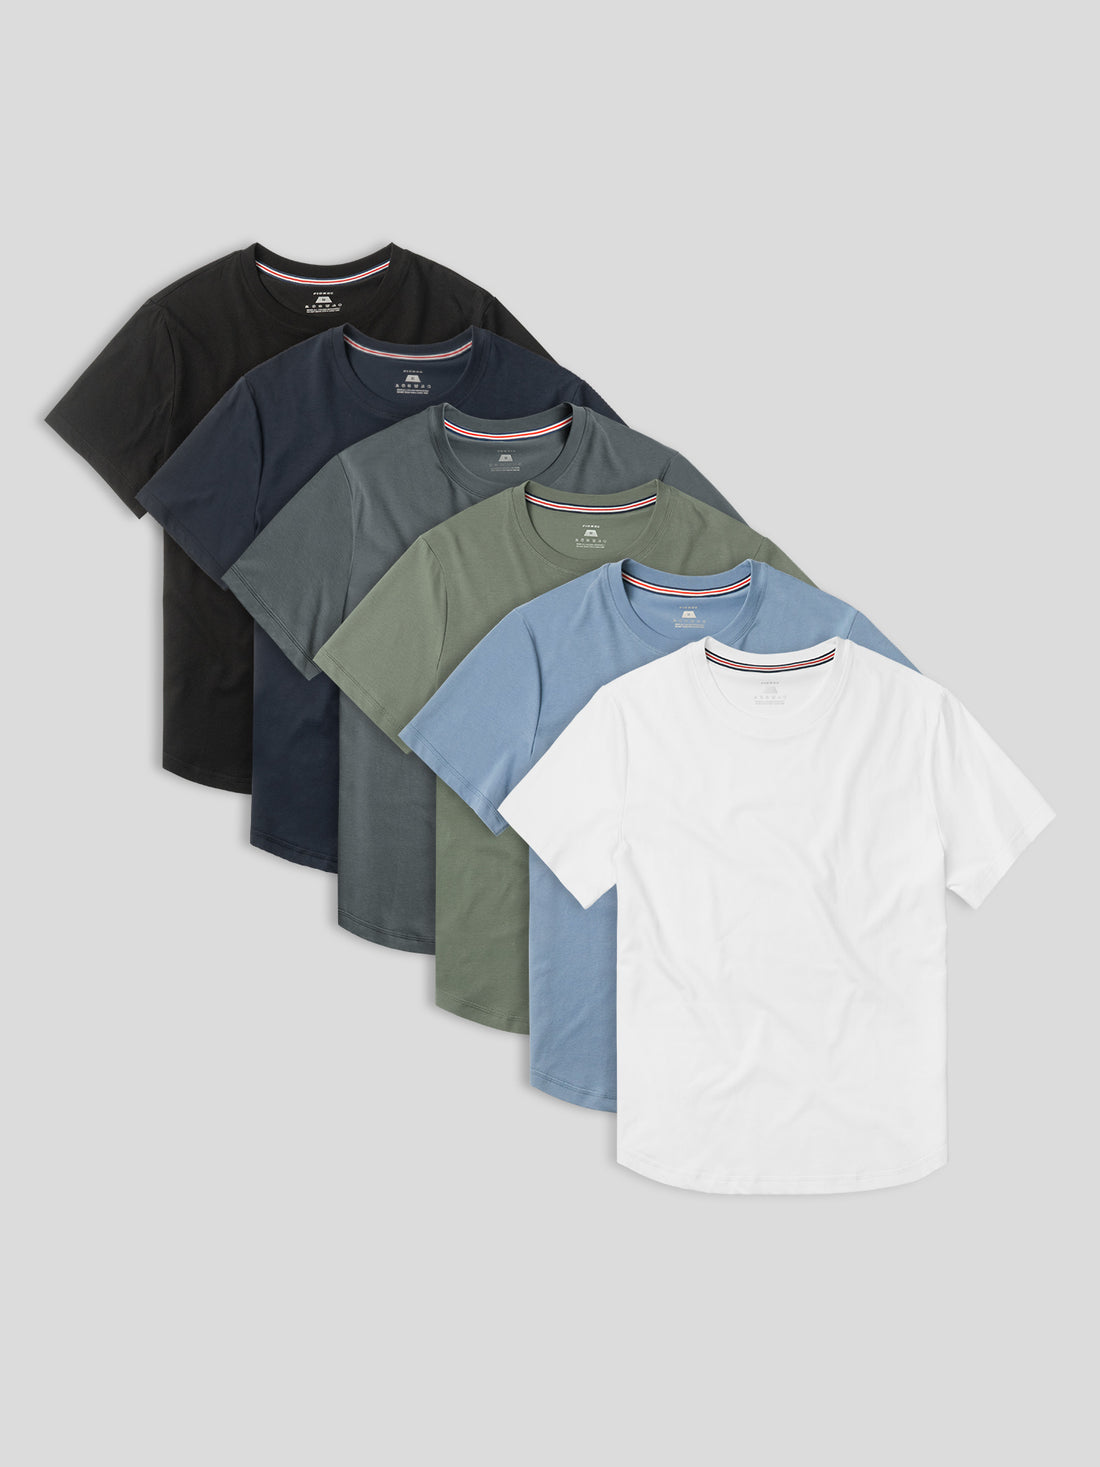 StayCool 2.0 Classic Fit Tee Multicolor 6-Pack